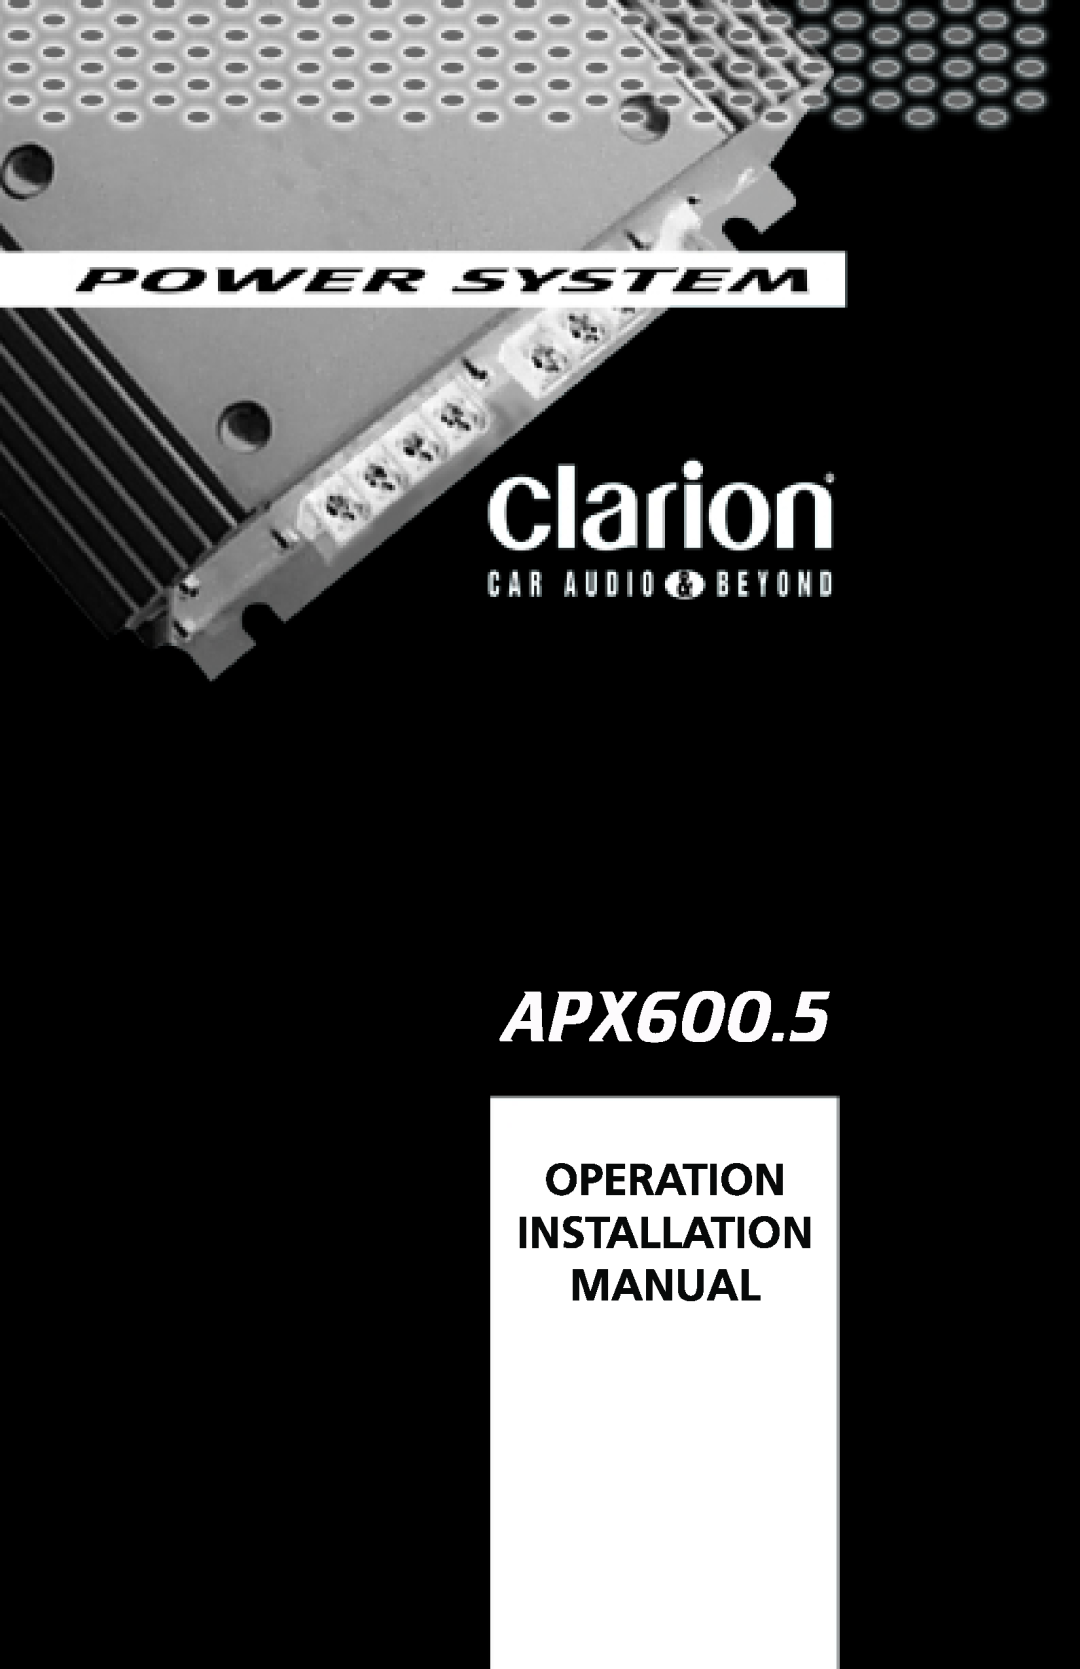 Clarion APX600.5 manual 